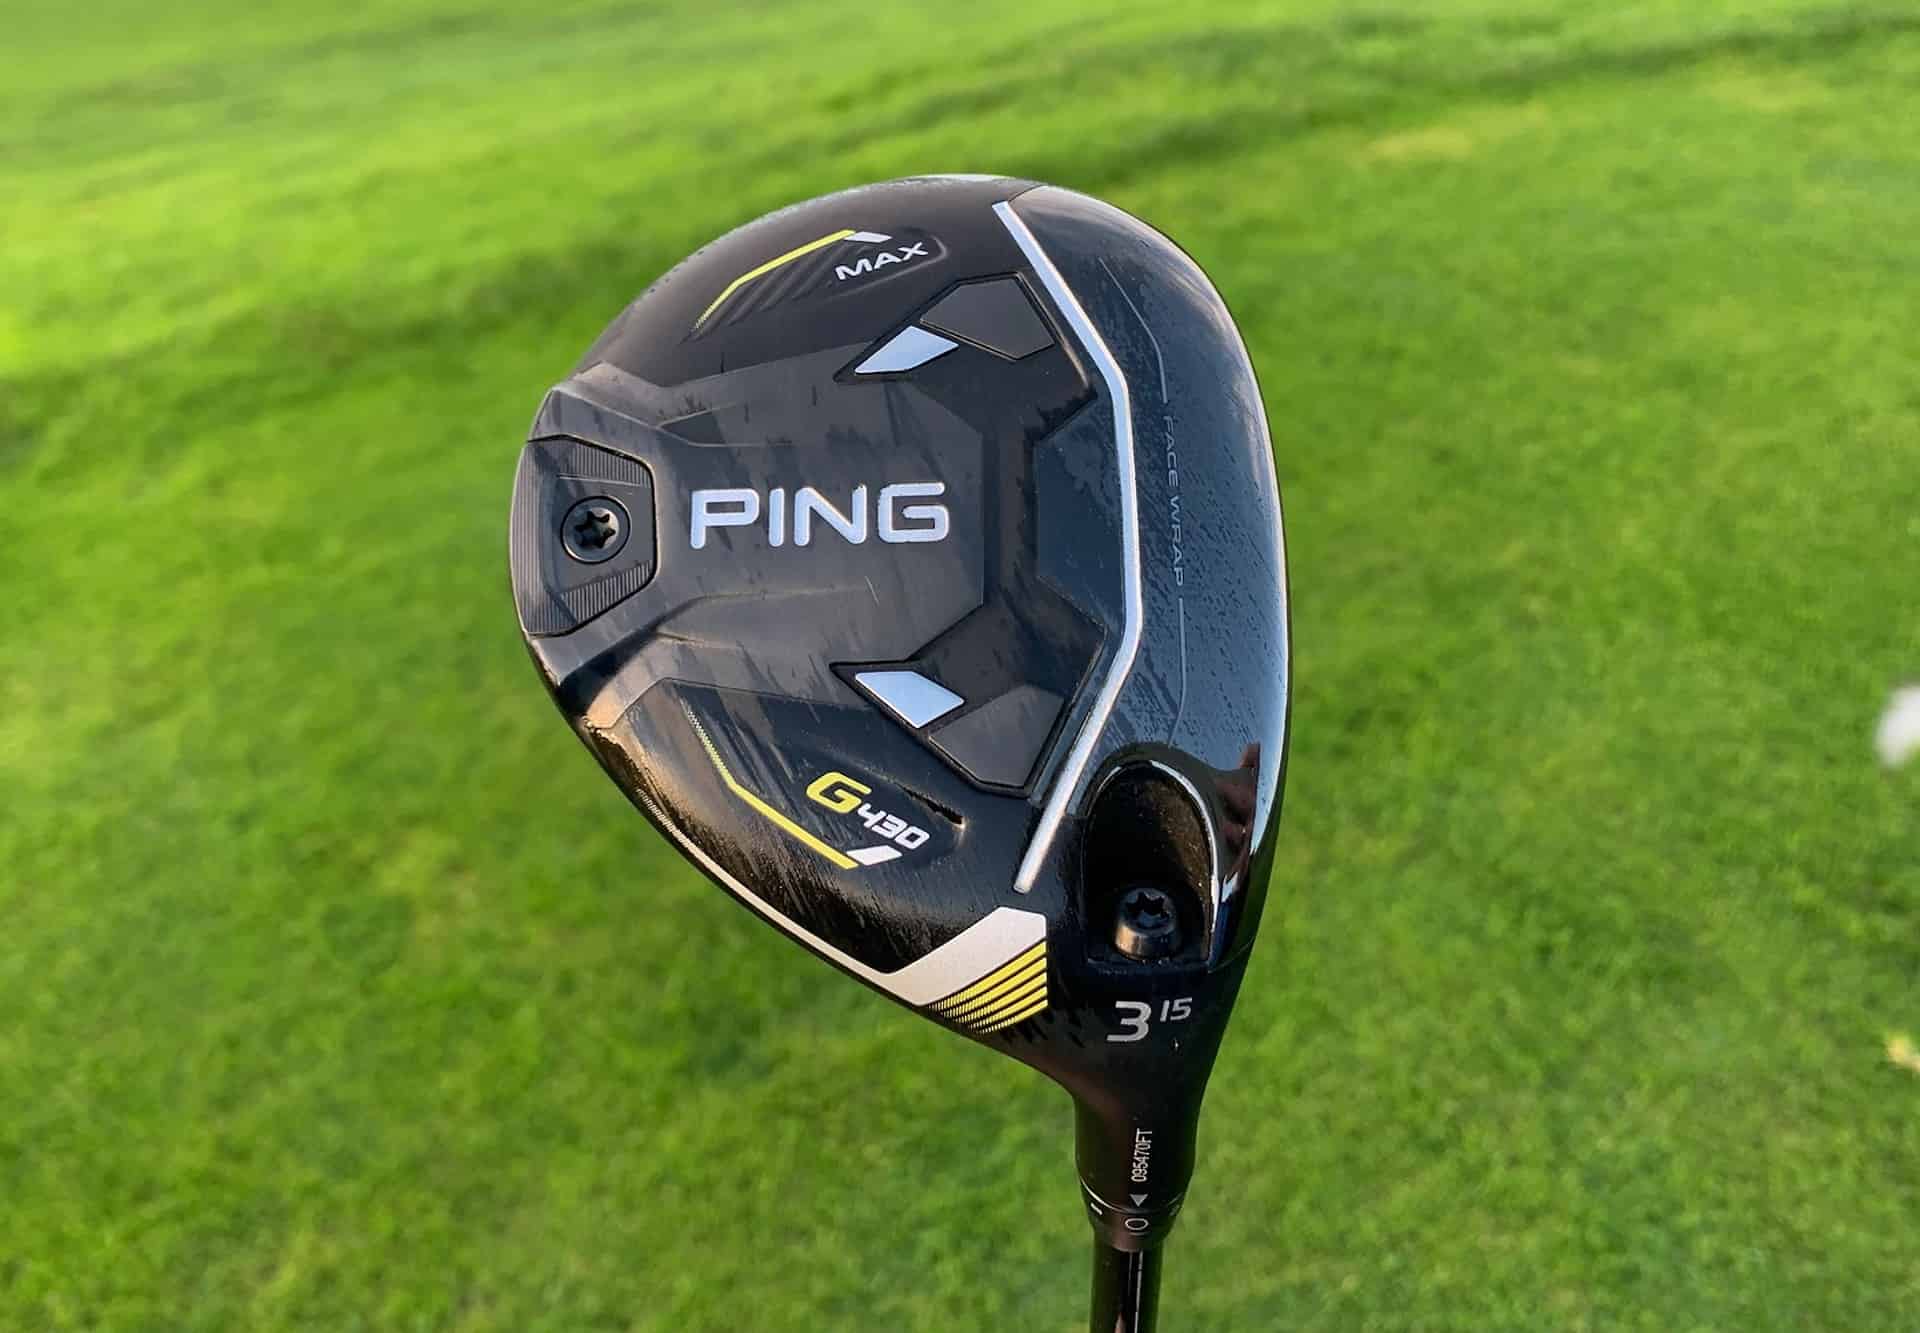 Ping G430 Max fairway woods review